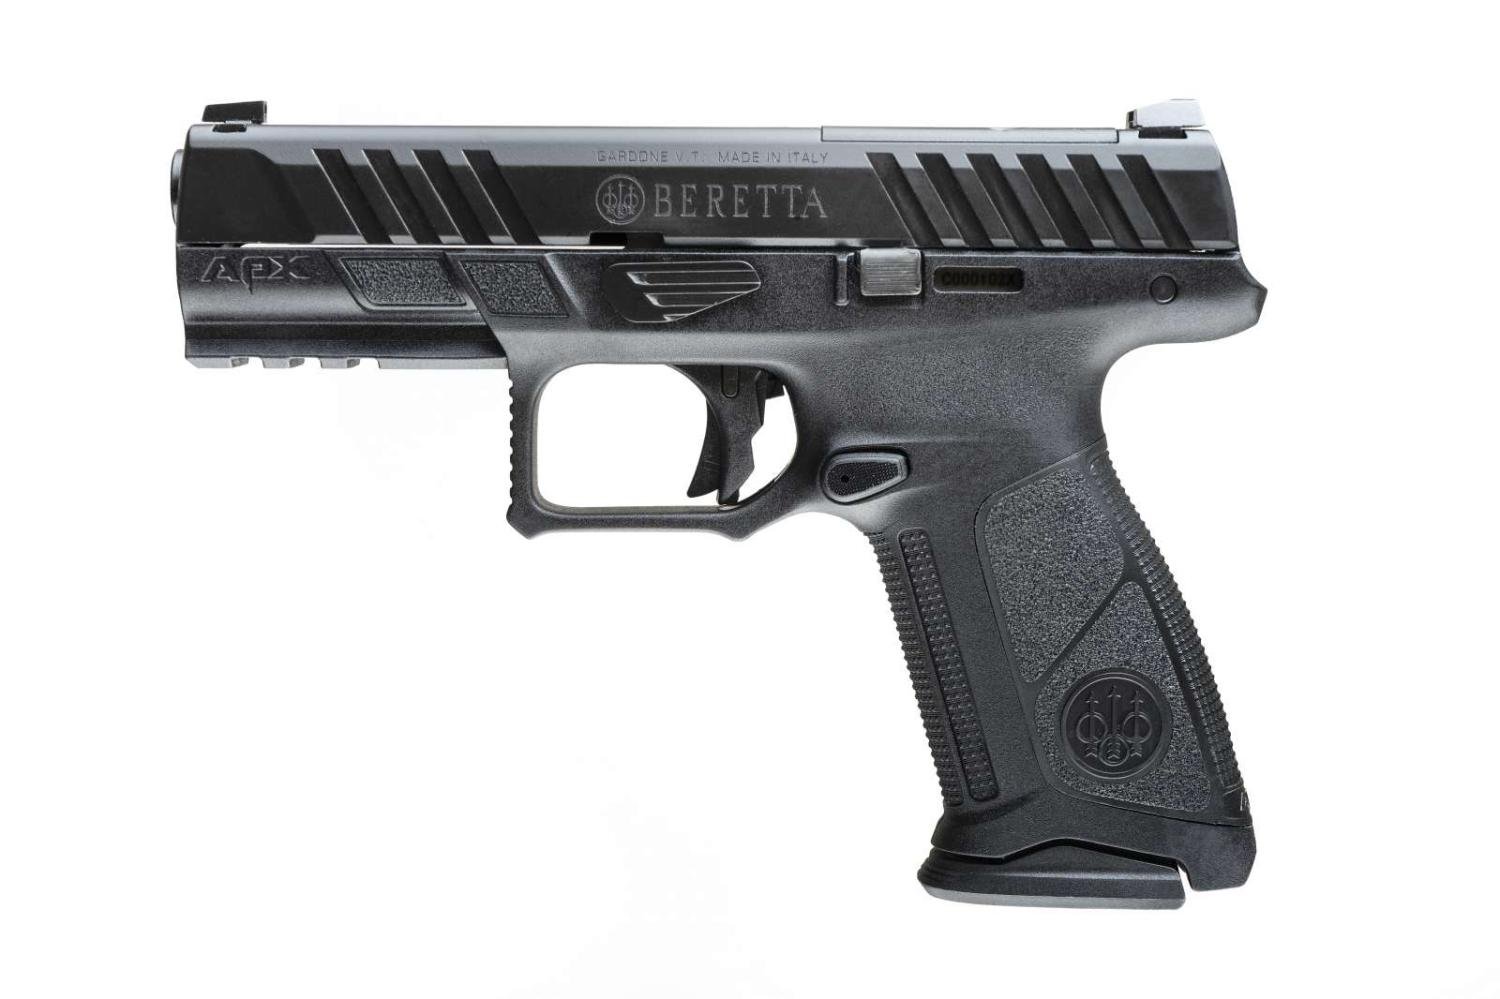 Beretta APX A1 Full Size RDO 9mm 4.25 17 Rounds Black - $364.79 (add to cart to get this price) ($314.79 After $50 MIR)